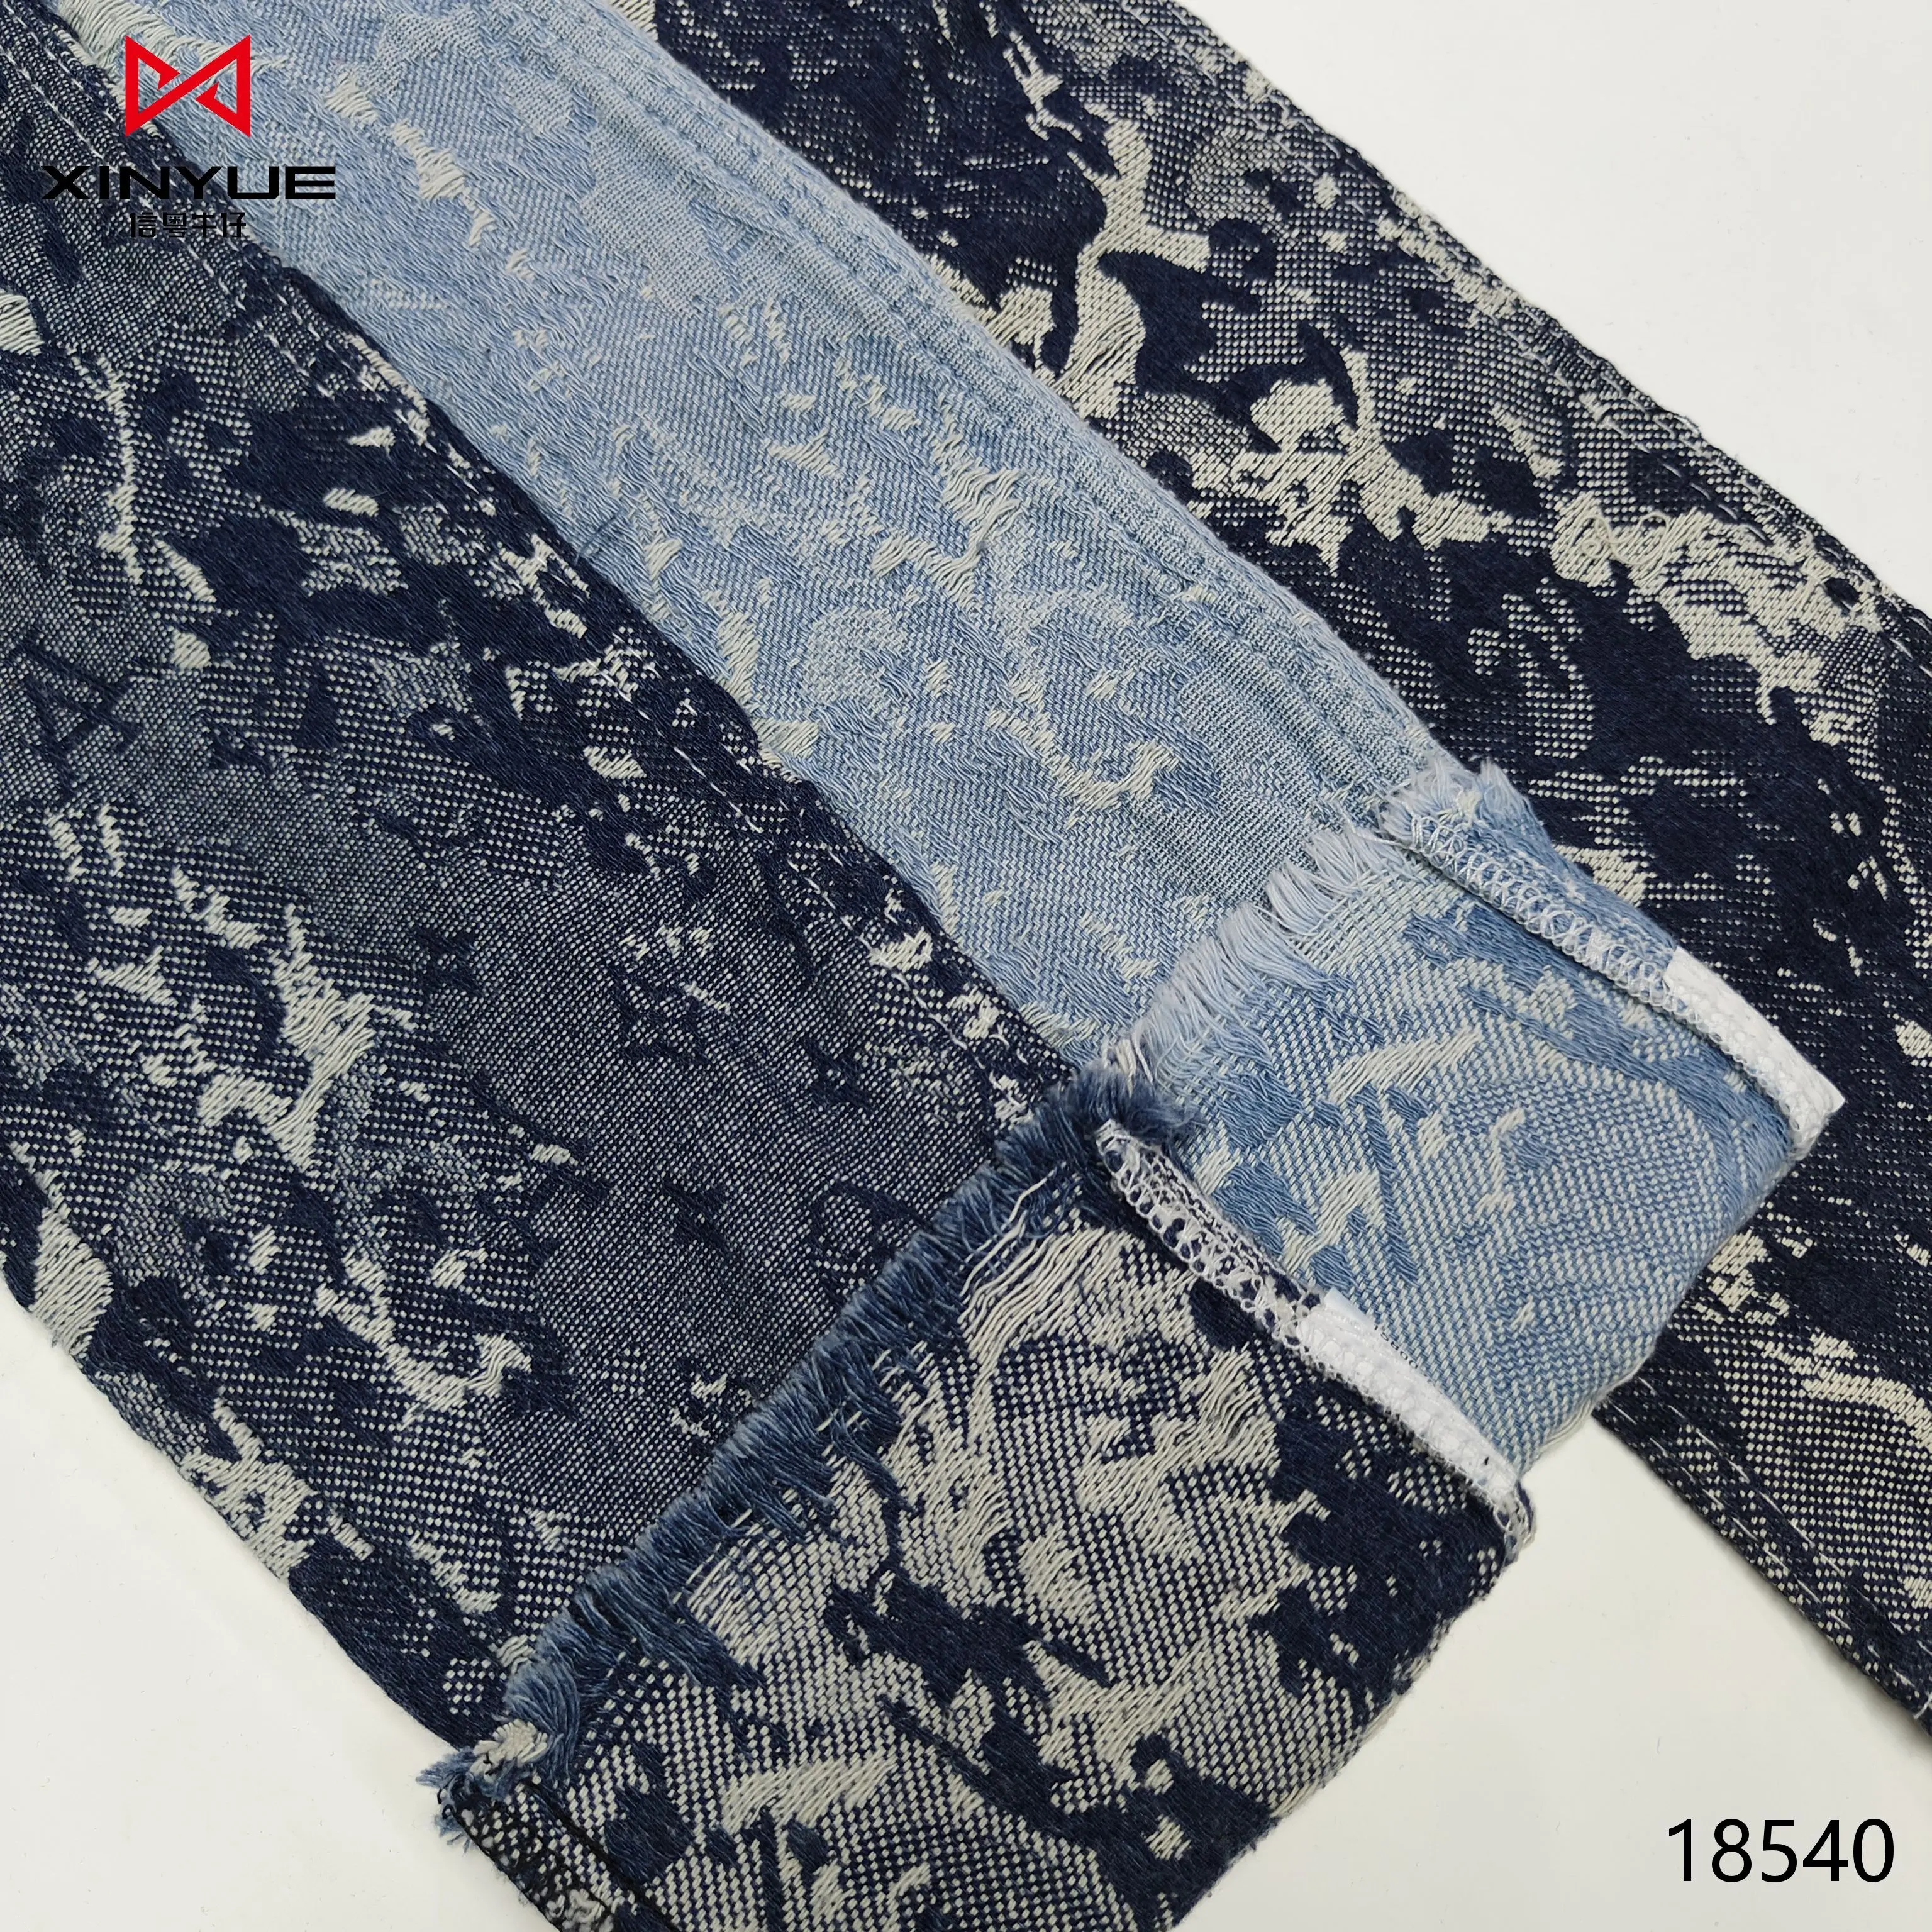 Punching color printing all Cotton thin dobby jacquard denim meter fabric wide with handfeeling denim fabric for jacket